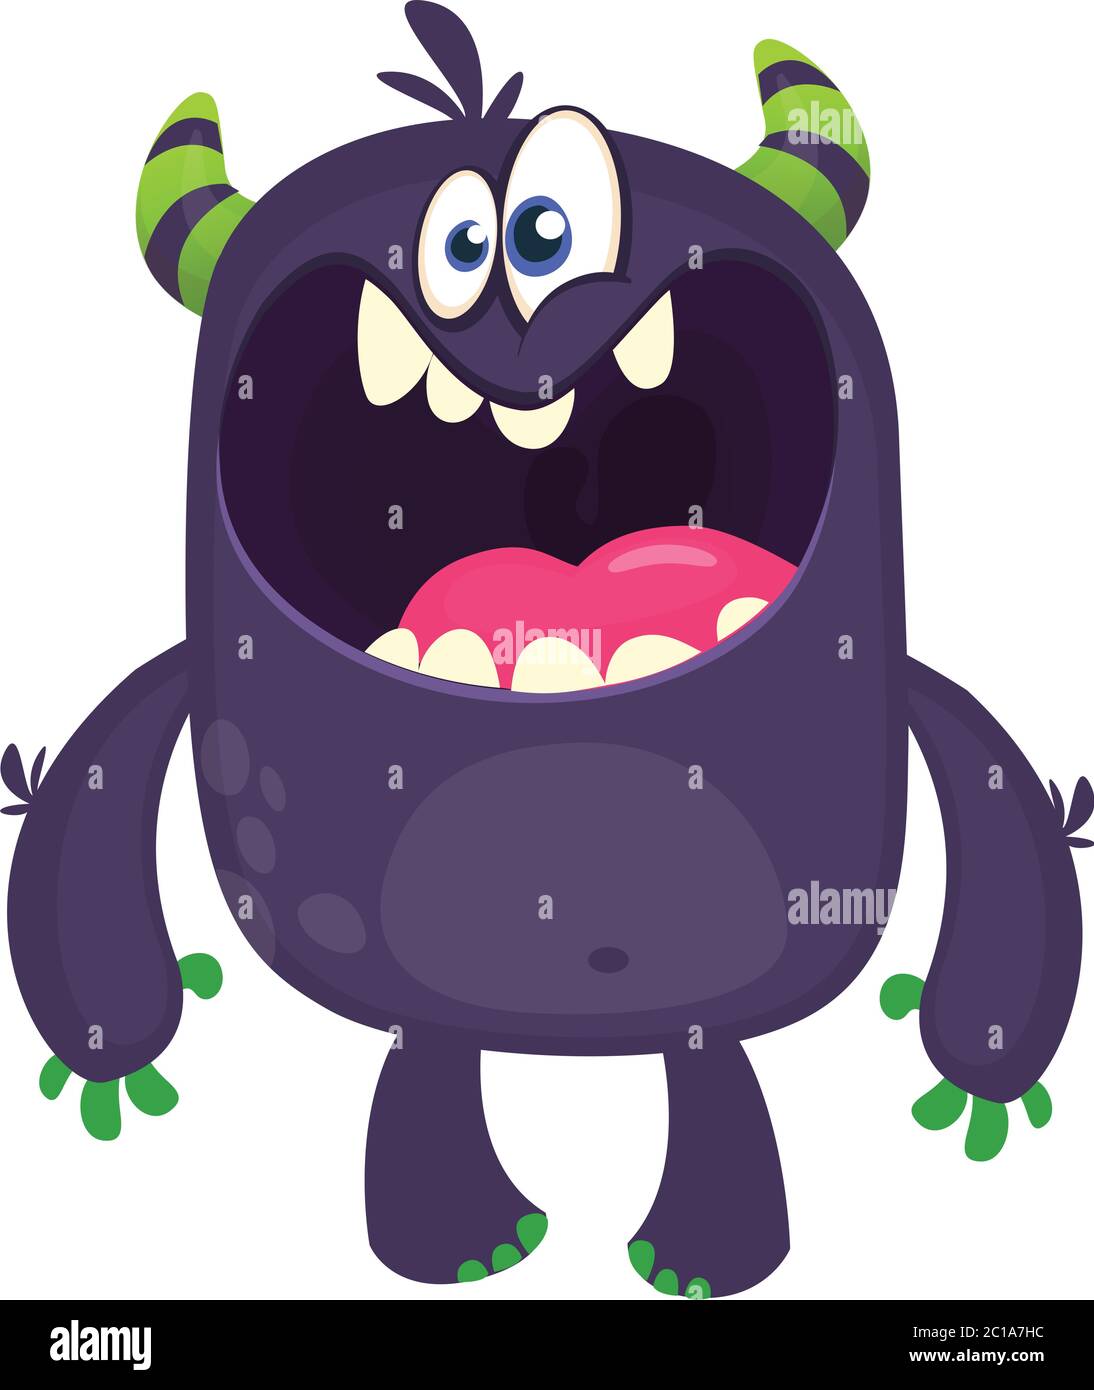 Scary Cartoon Black Monster Screaming Yelling Angry Monster Expression Big Collection Of Cute